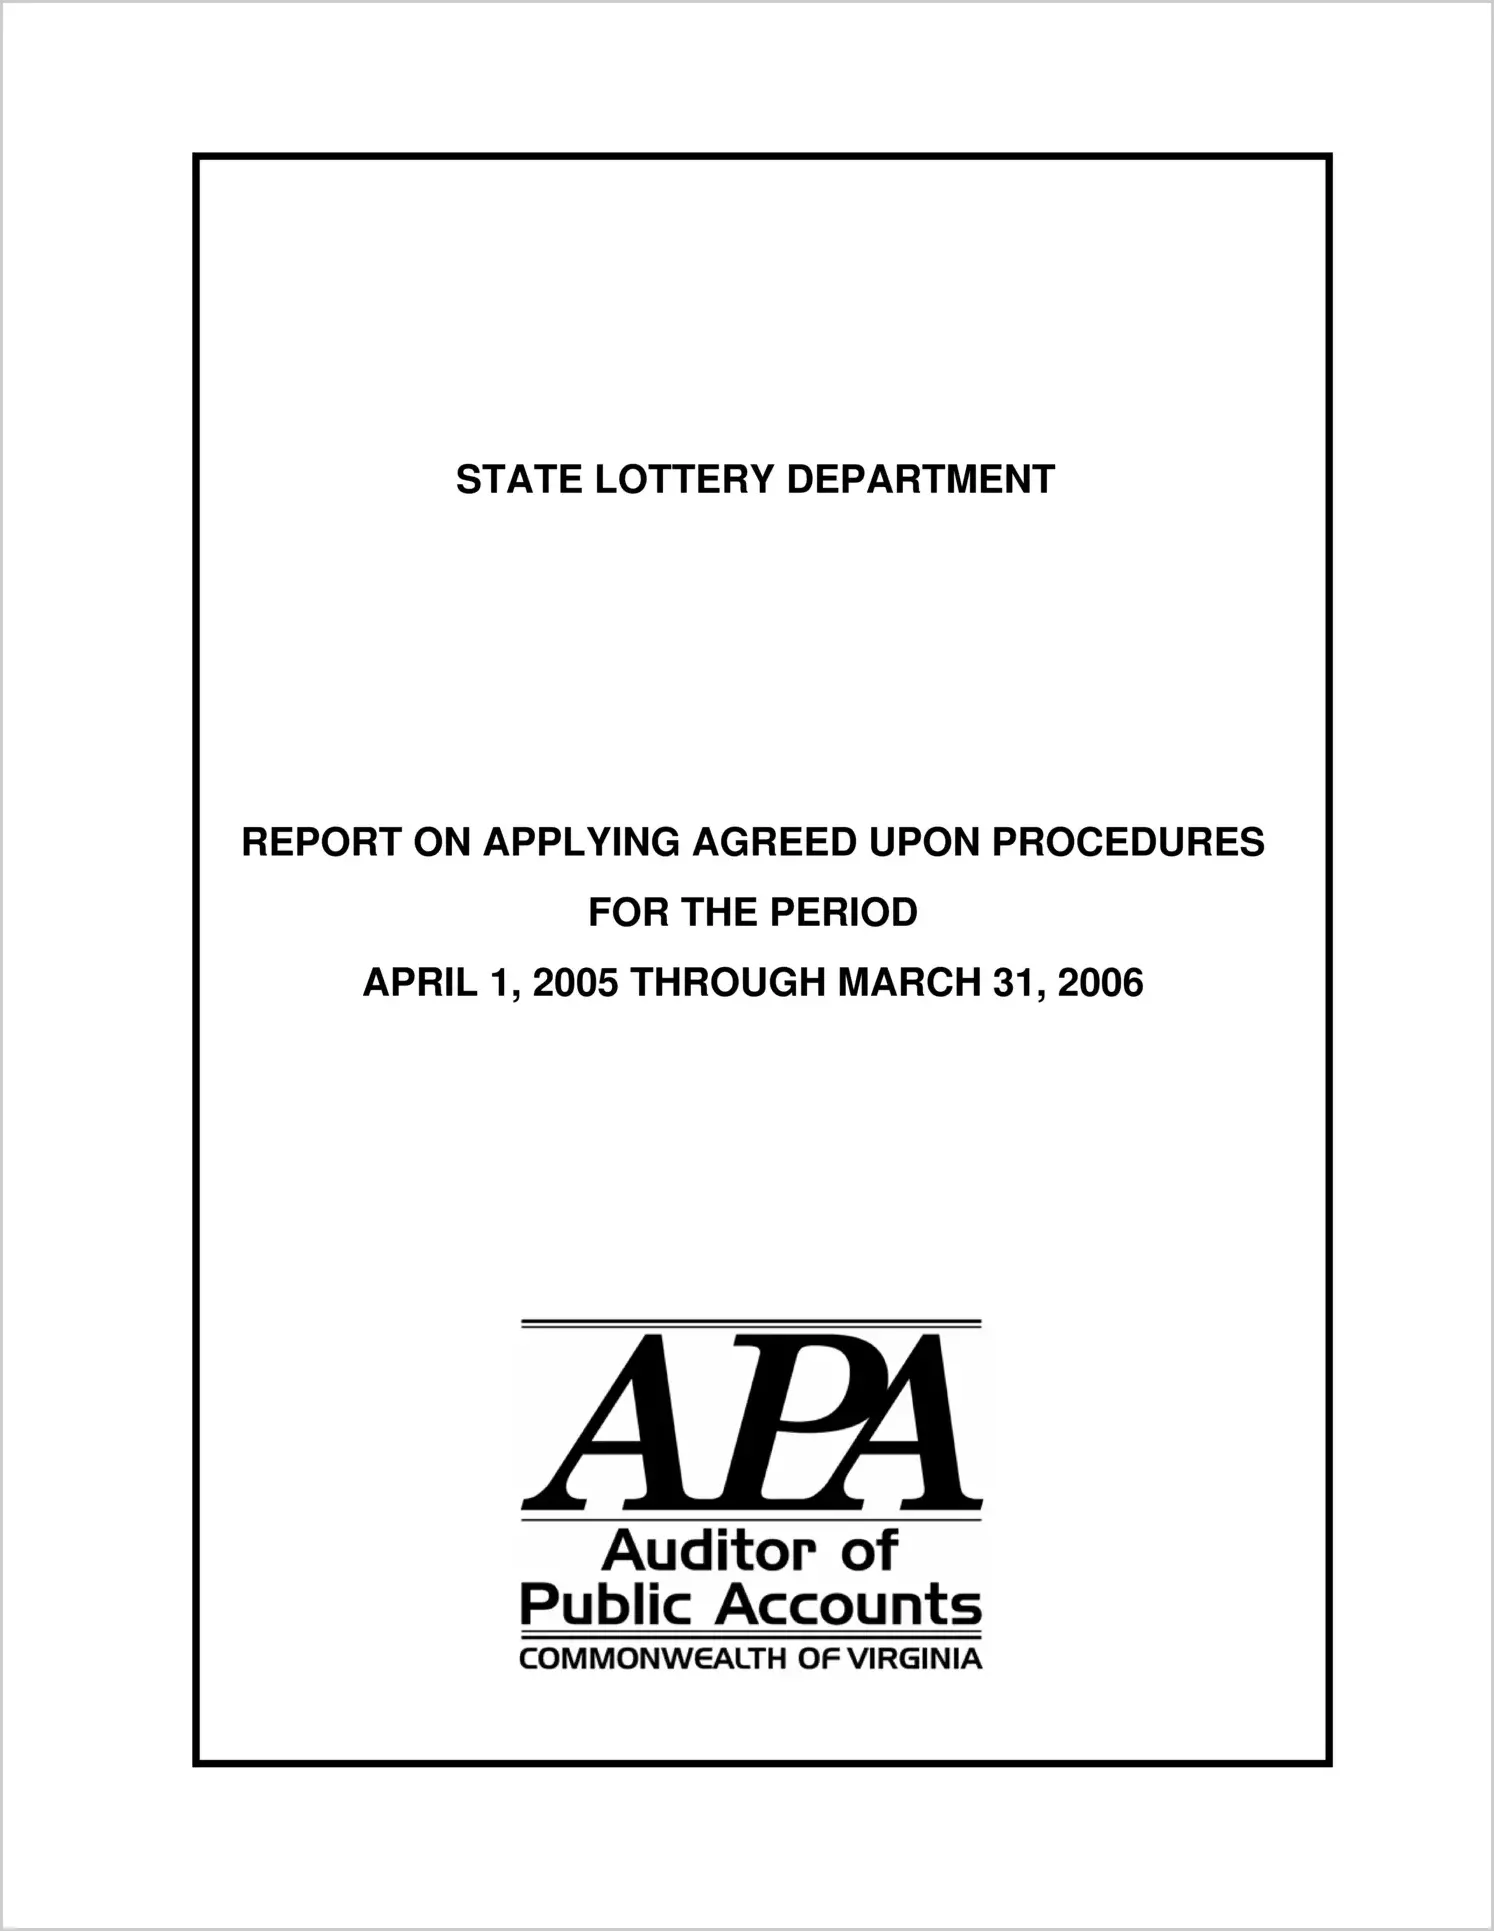 State Lottery Department Report on Applying Agreed-Upon Procedures for the period April 1, 2005 through March 31, 2006  (Mega Millions)